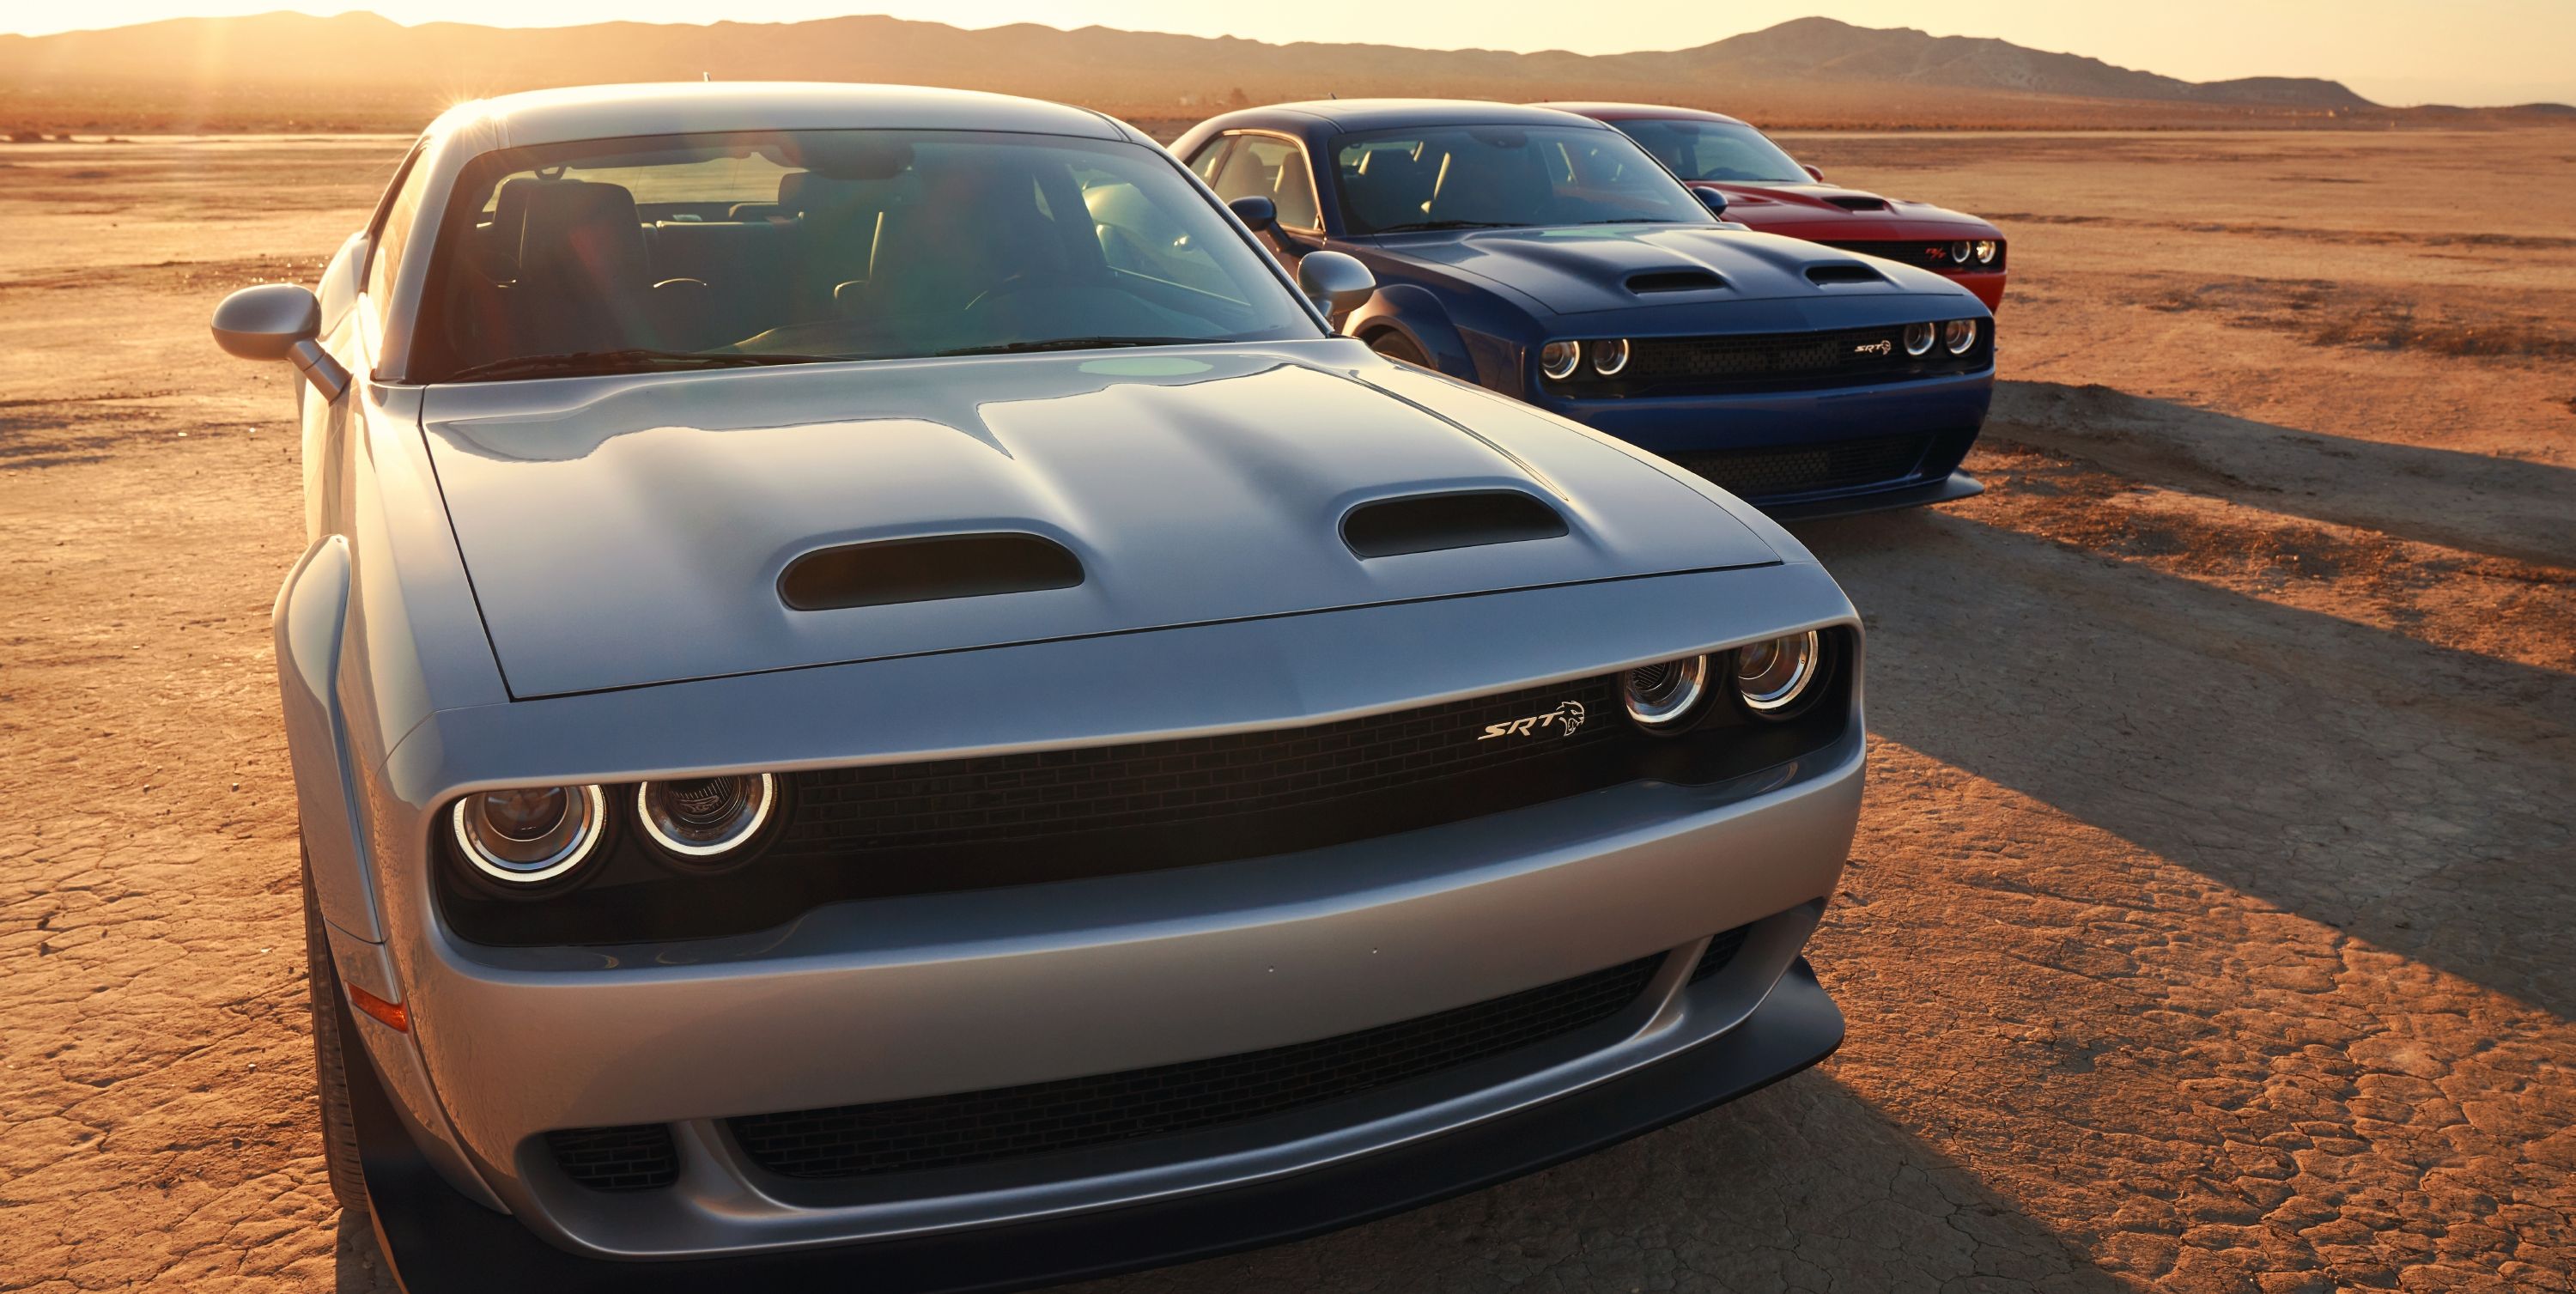 Dodge Quietly Removed the Manual-Transmission Challenger Hellcat Sometime in 2021